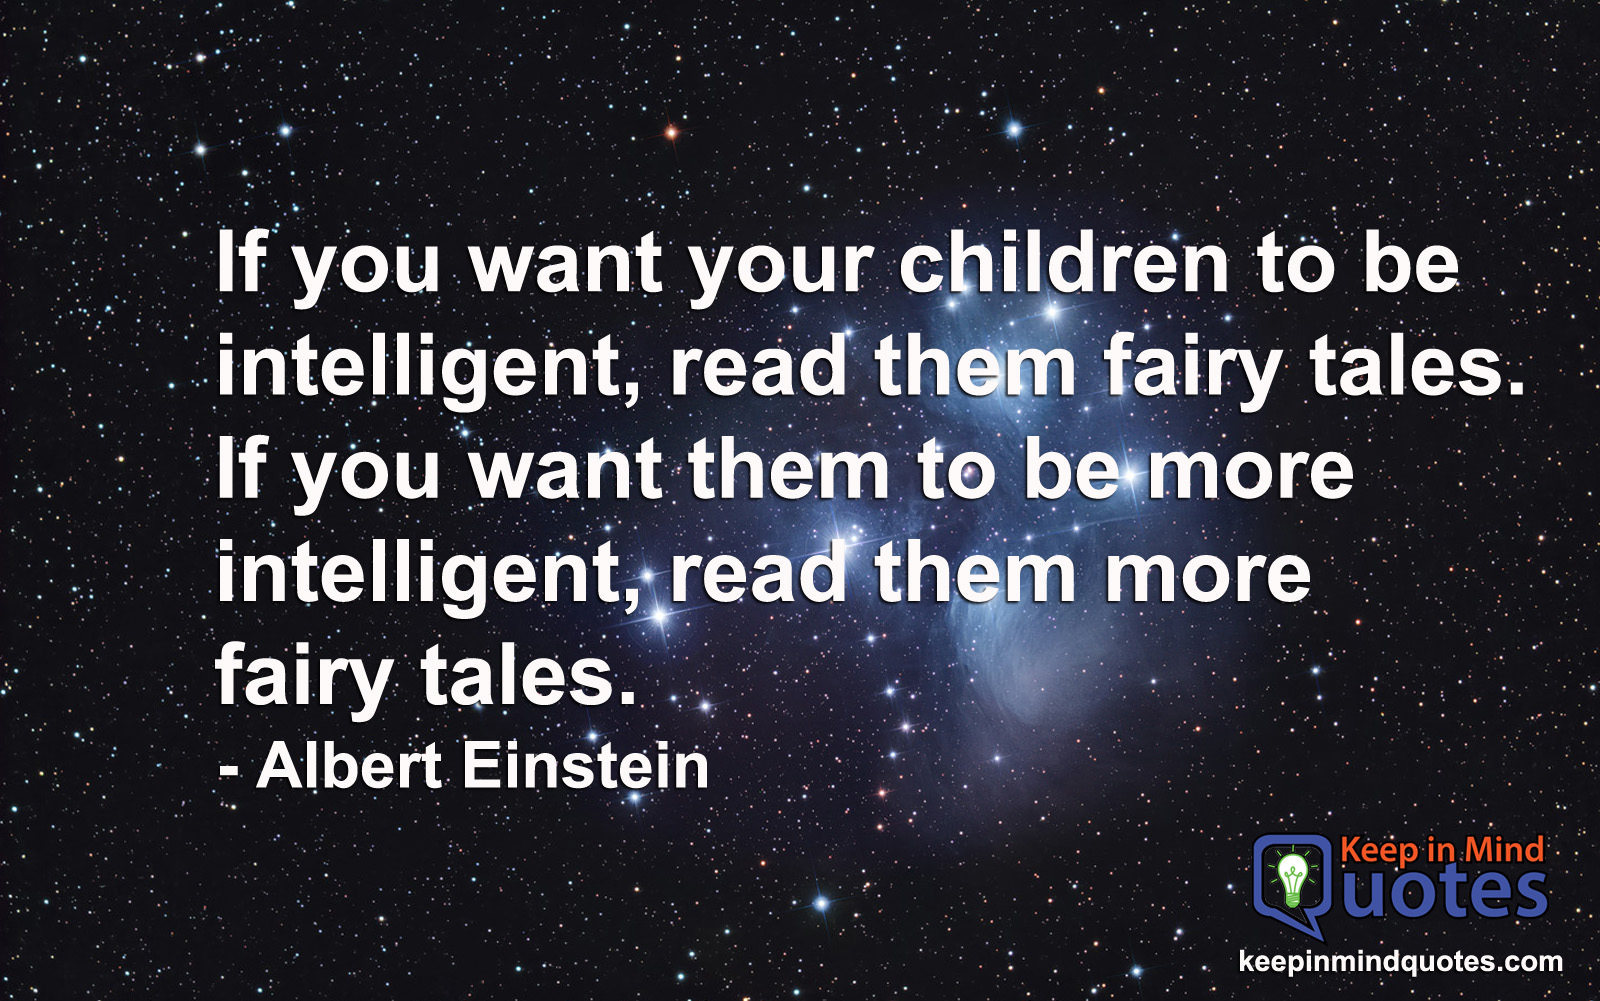 if you want our children to be intelligent road them fairy tales. if you want them to be more intelligent read them more fairy tales. albert einstein